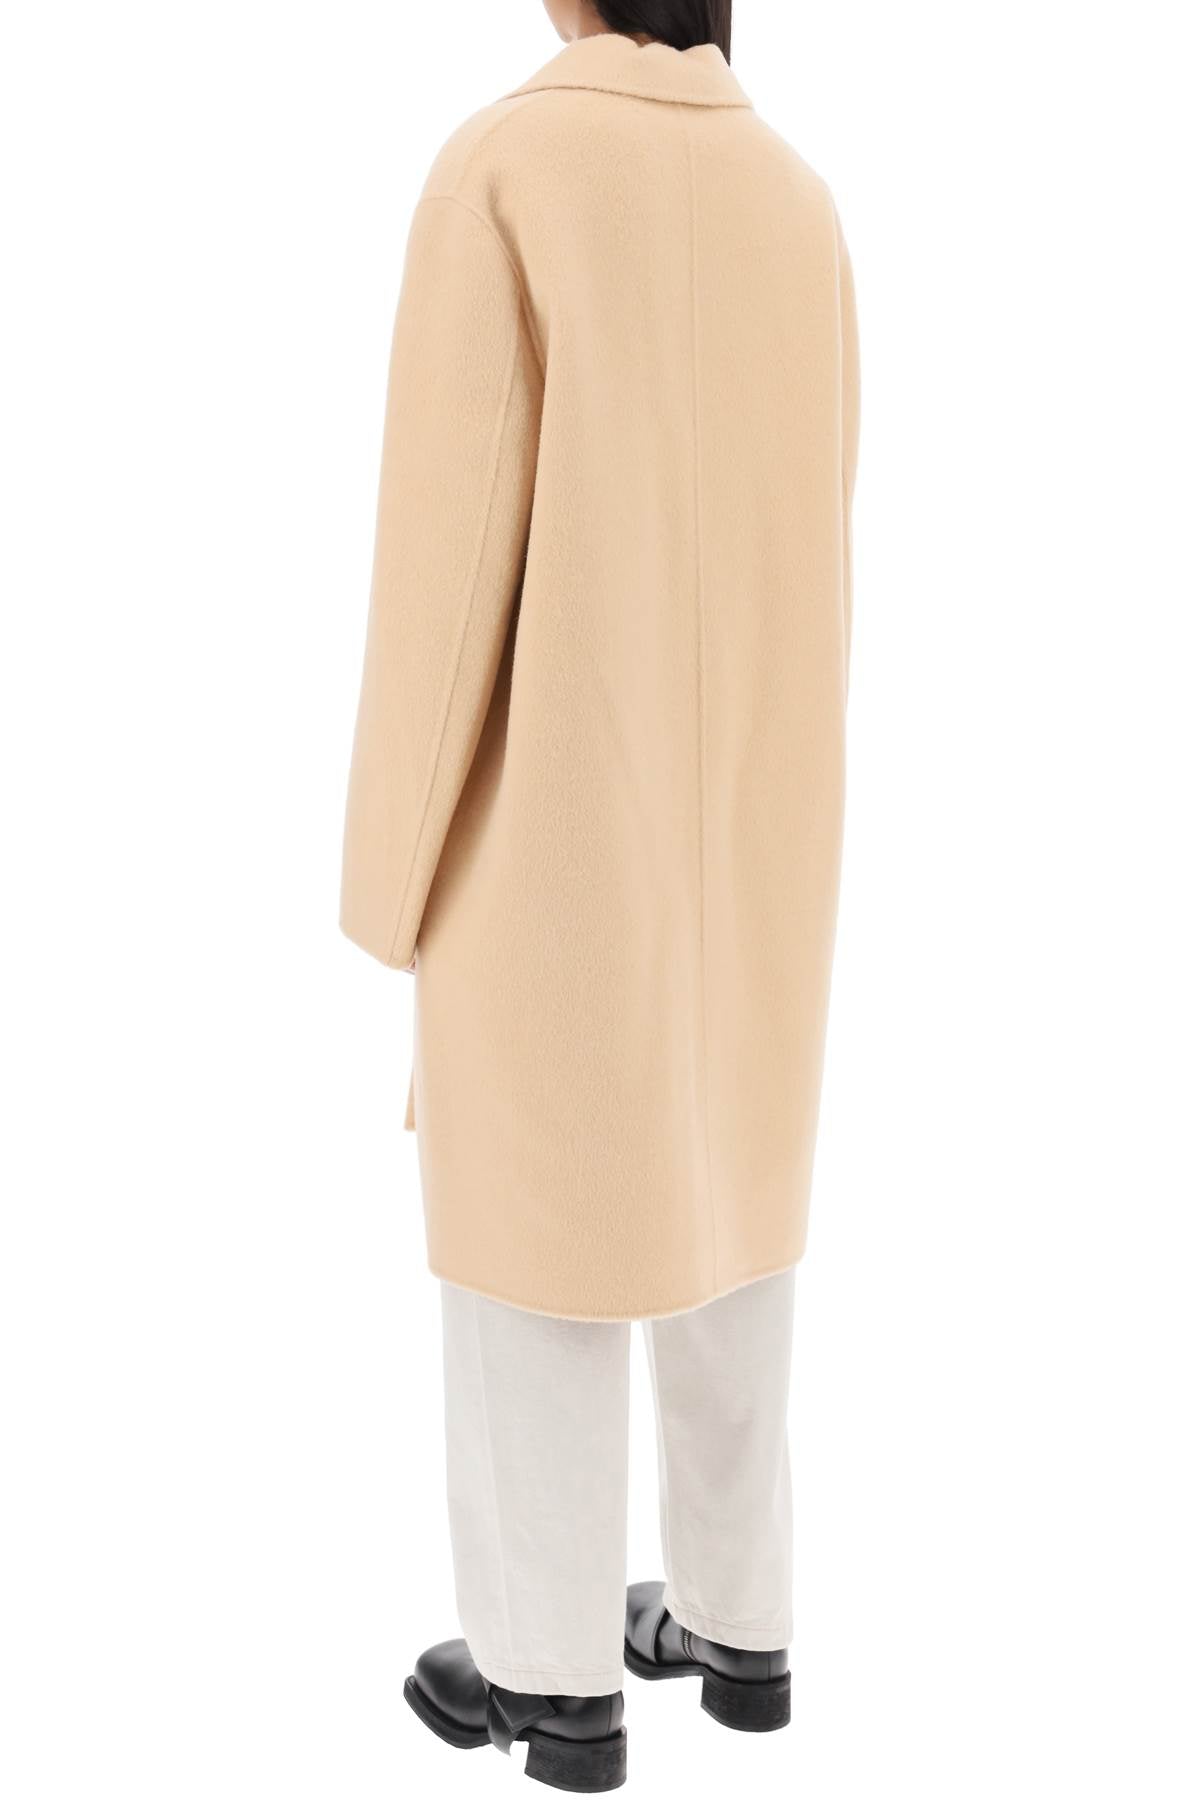 ACNE STUDIOS Stylish Brushed-Wool Jacket for Women in Beige - FW23 Collection